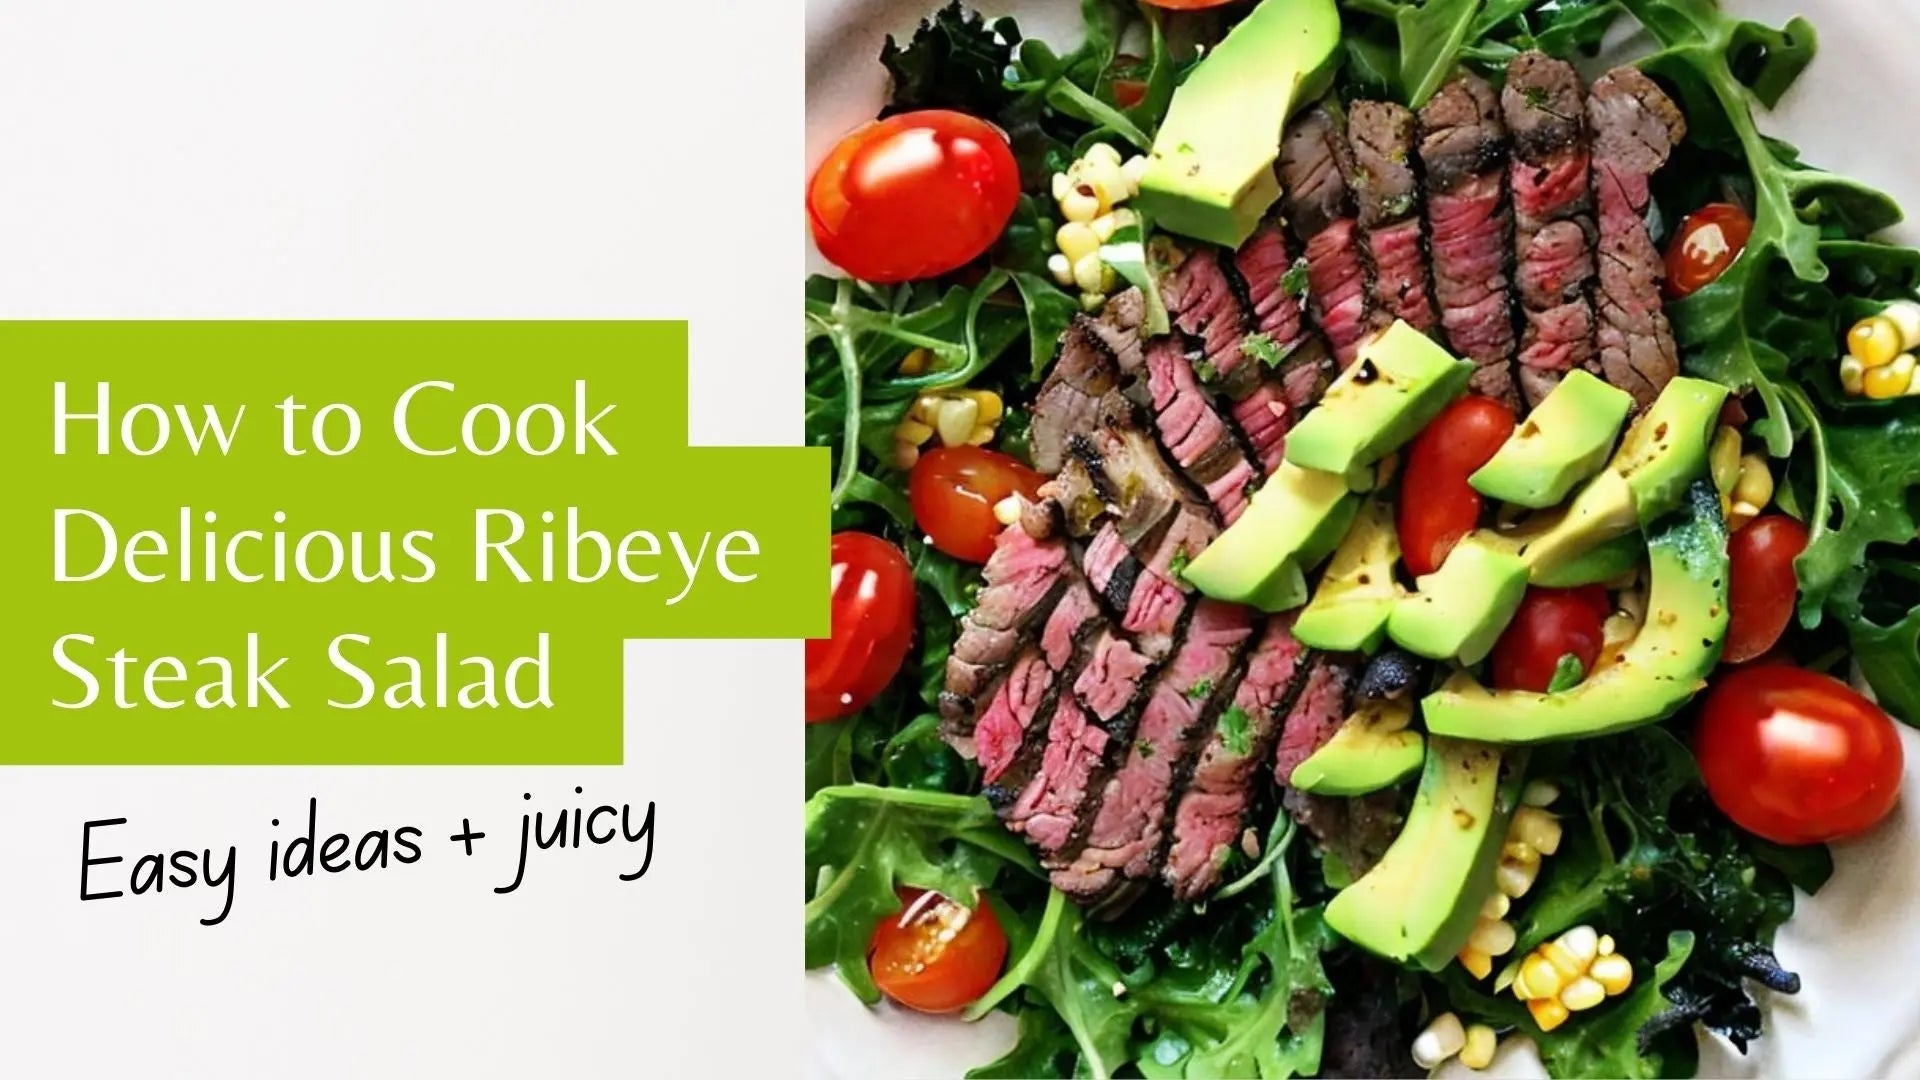 How to Cook Delicious Ribeye Steak Salad with wireless meat thermometer